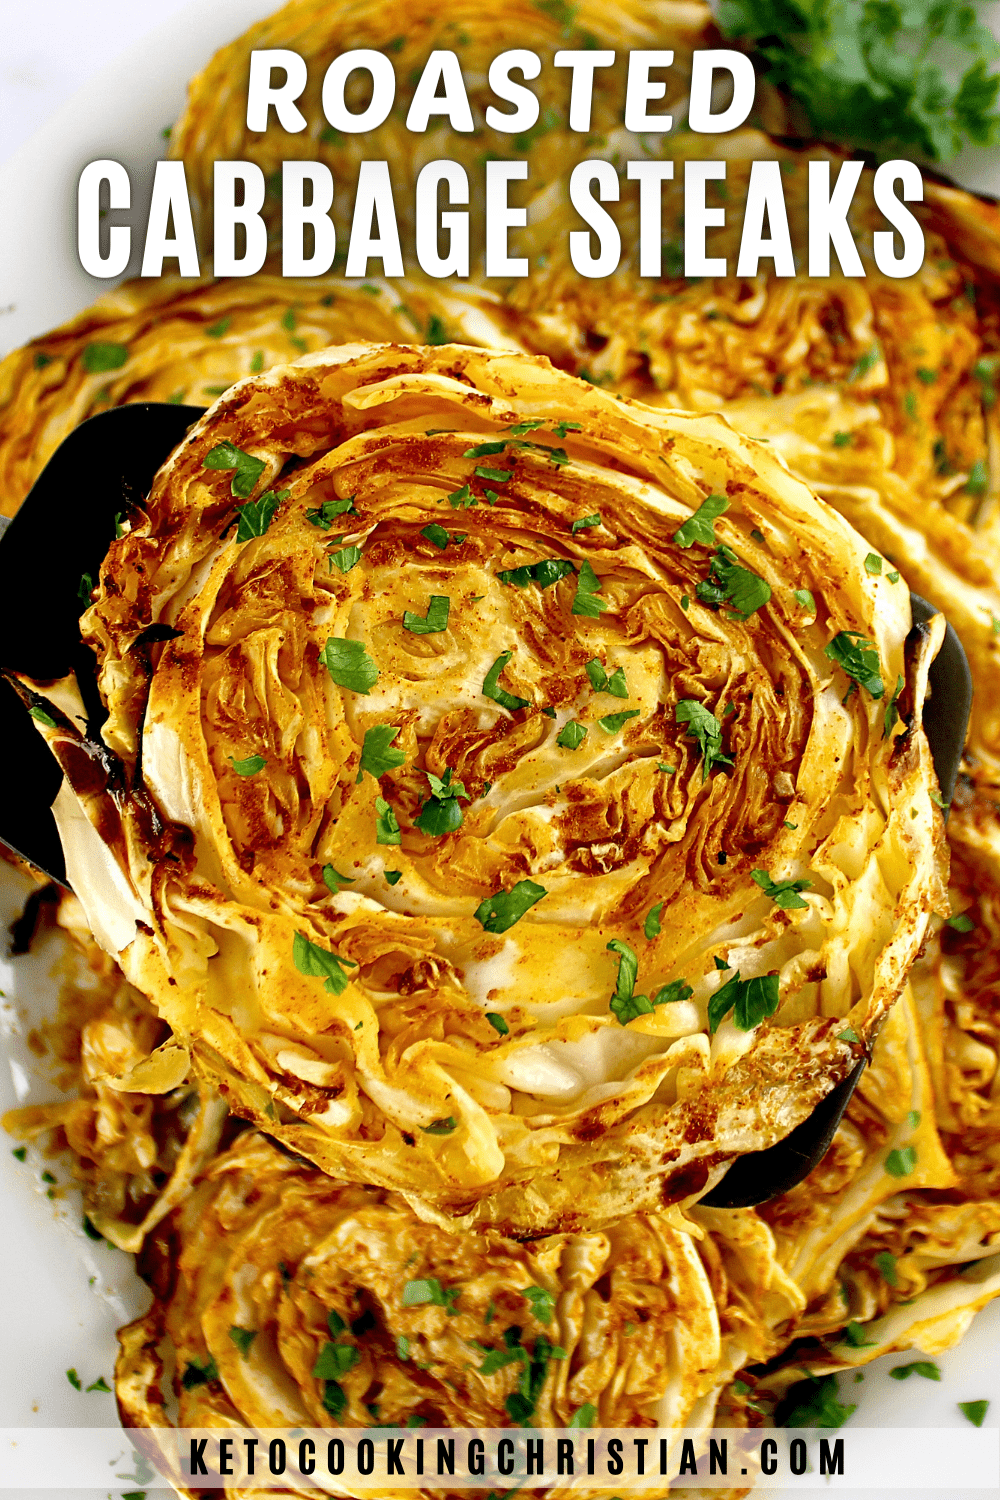 Roasted Cabbage Steaks pin